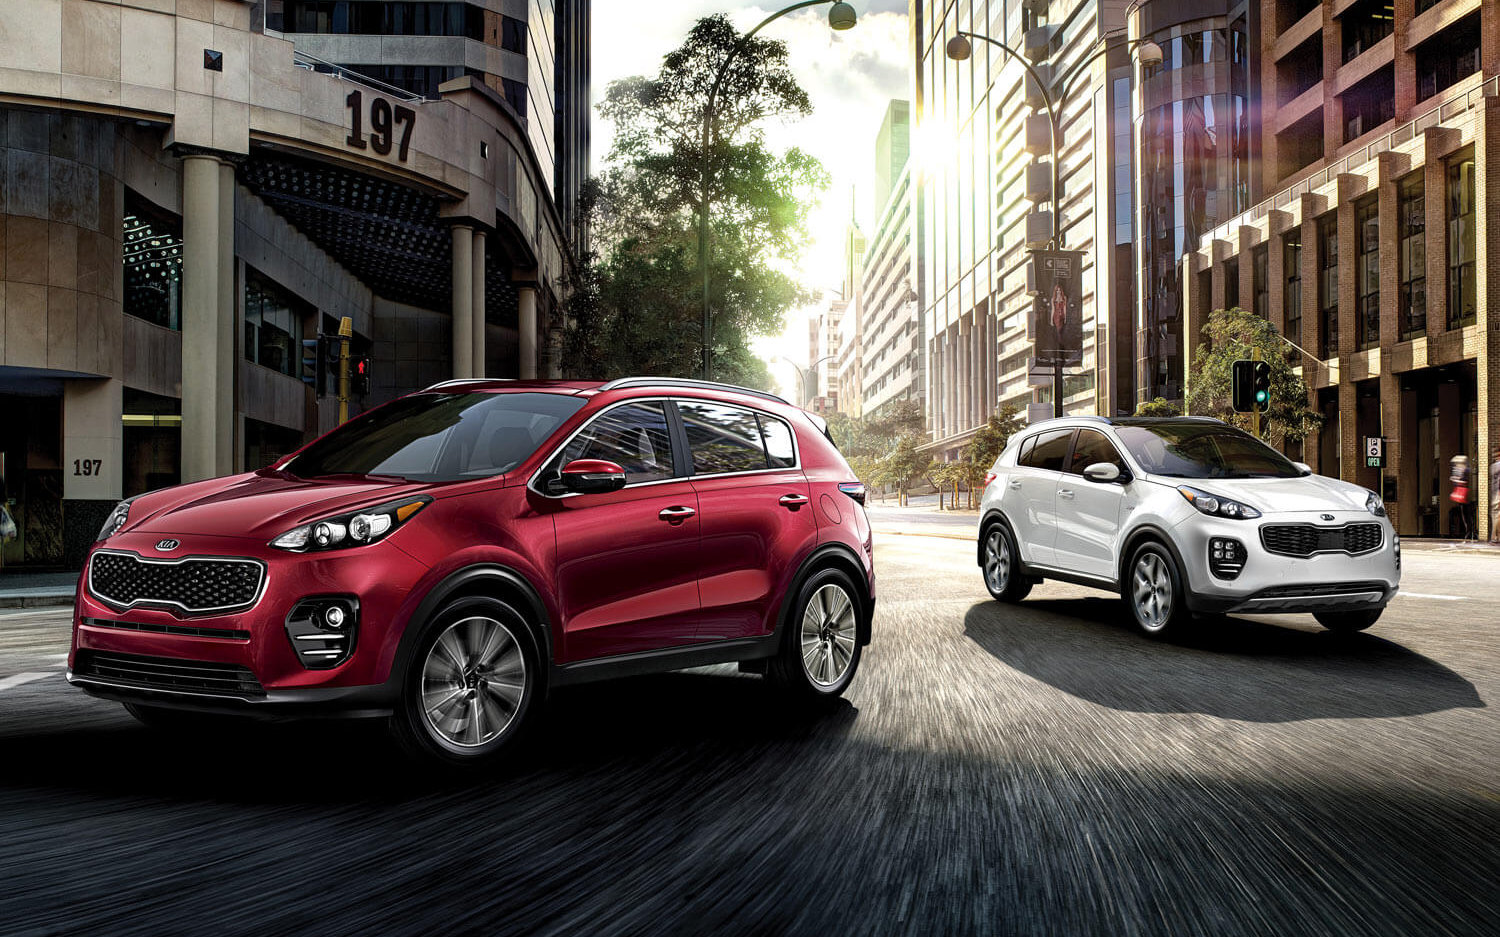 Get a Deal on Your Dream Car 7 Tips for Buying a Kia